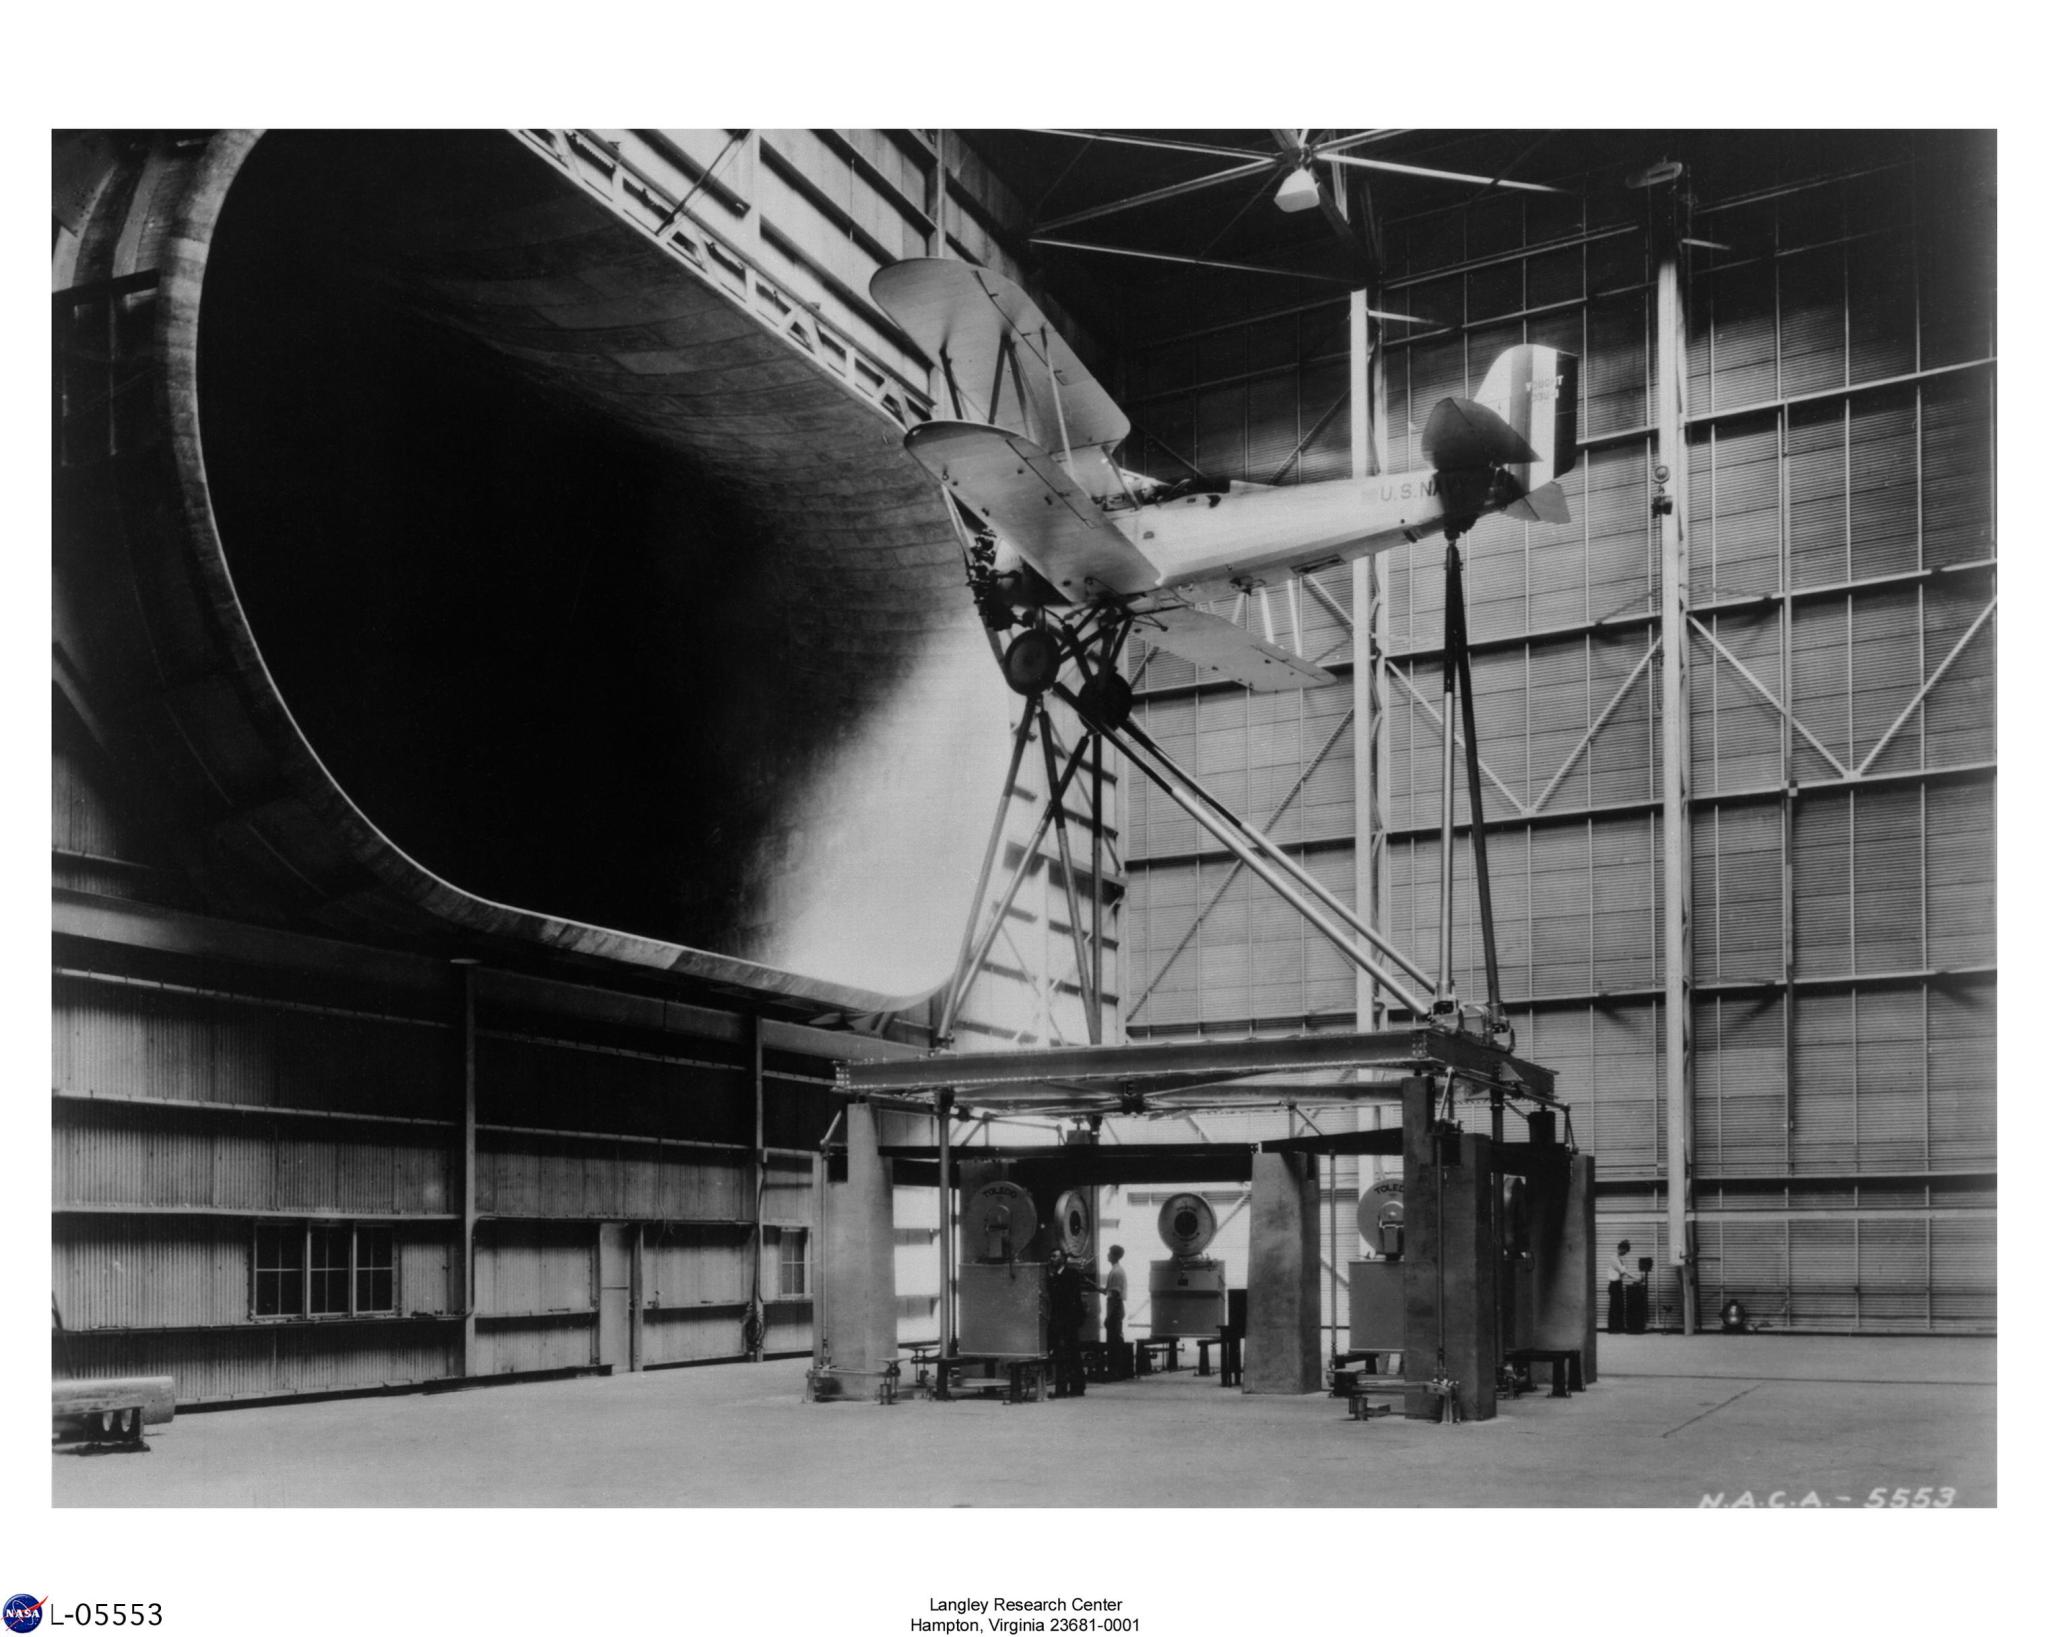 The first full-scale aircraft tested in the Full-Scale Tunnel was a Navy Vought O3U-1 Corsair II undergoing a drag cleanup study in May of 1931. 